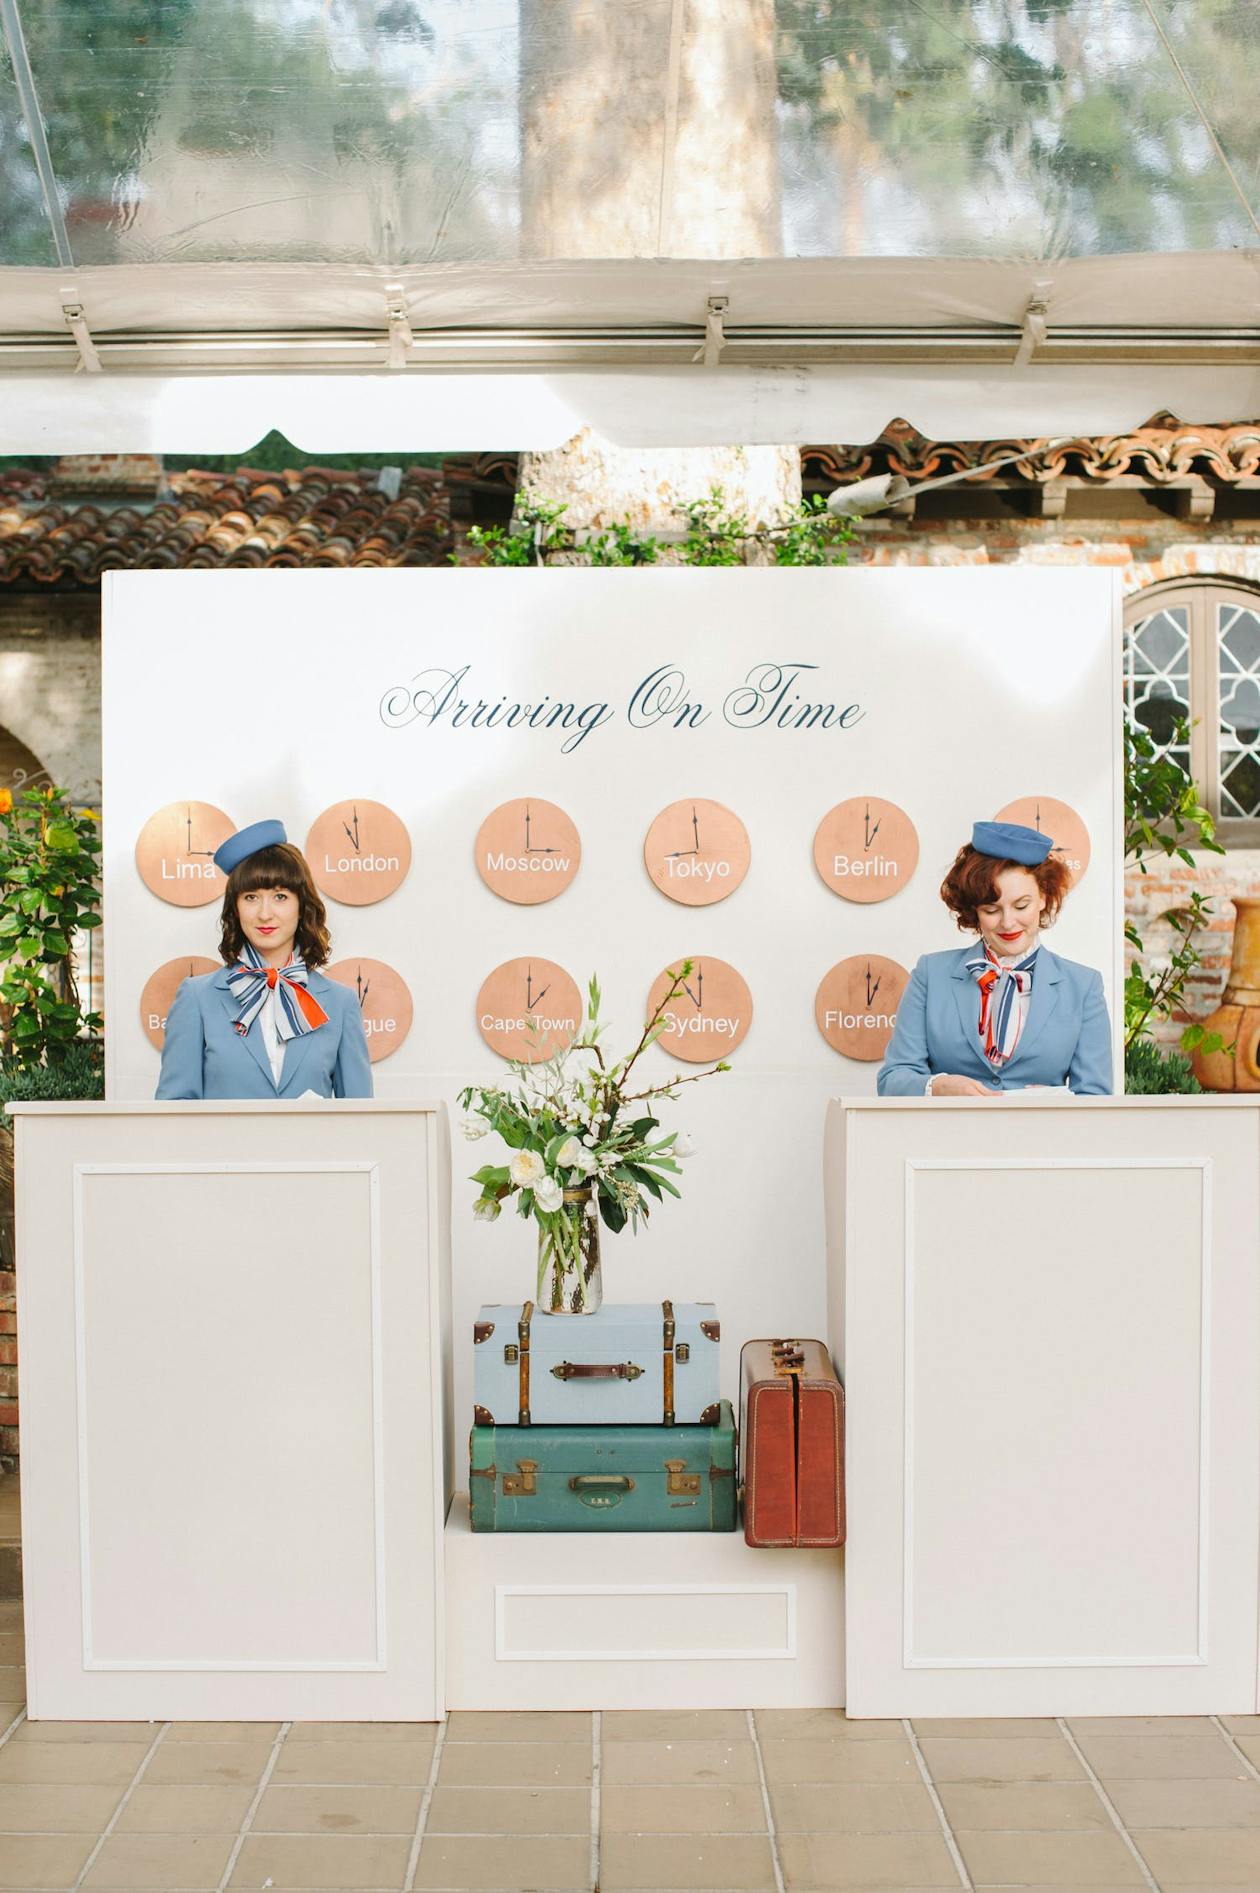 Travel Themed Wedding With Pastel Colors and Airport Gate Agents | PartySlate